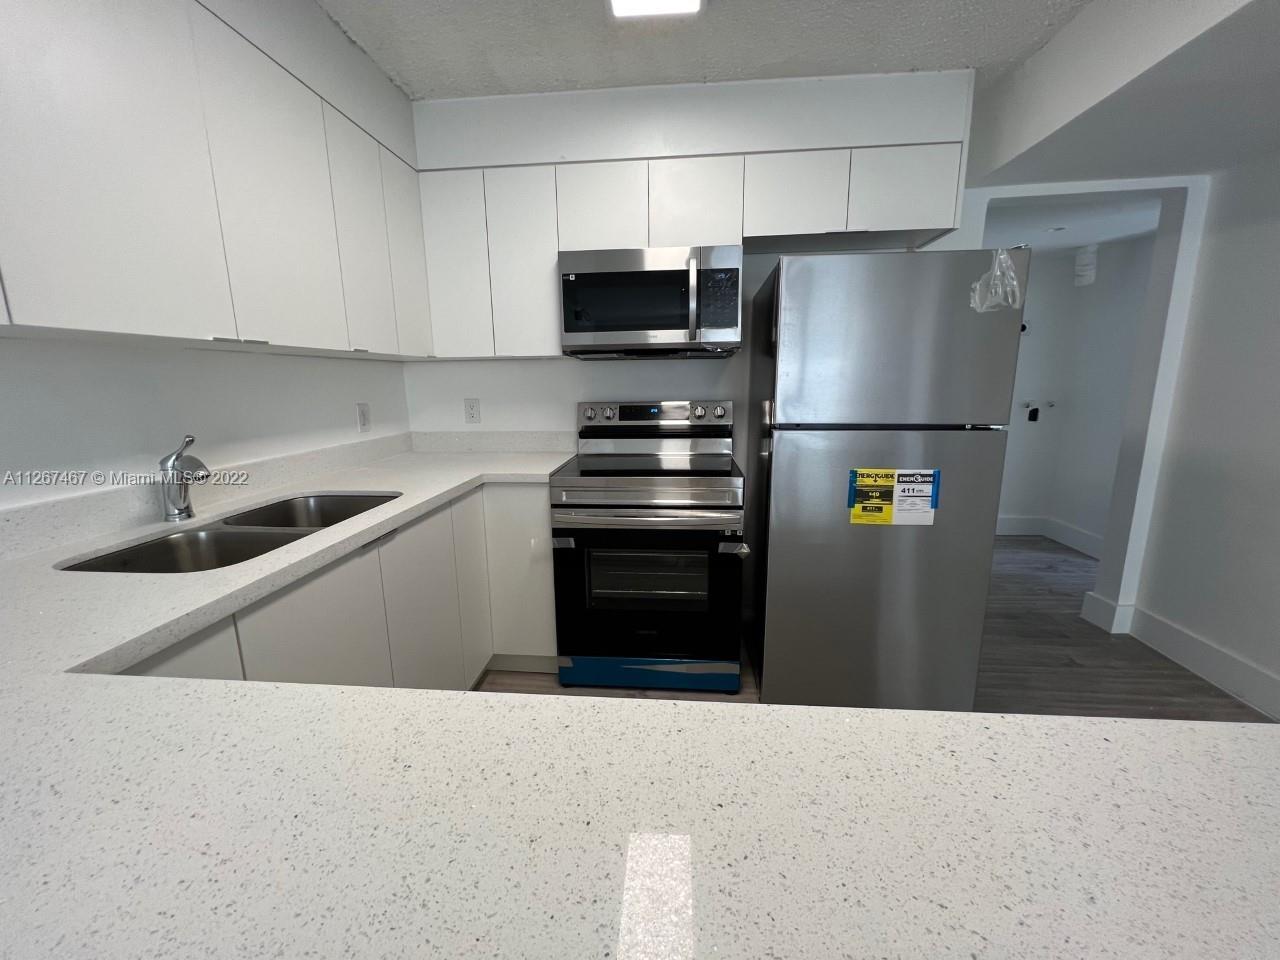 NICE 2 BEDS 1 BATH HOME NEWLY REMODELED, NEW STAINSTEEL APPLIANCES, LAMINATE FLOOR THROGHOUT THE UNI